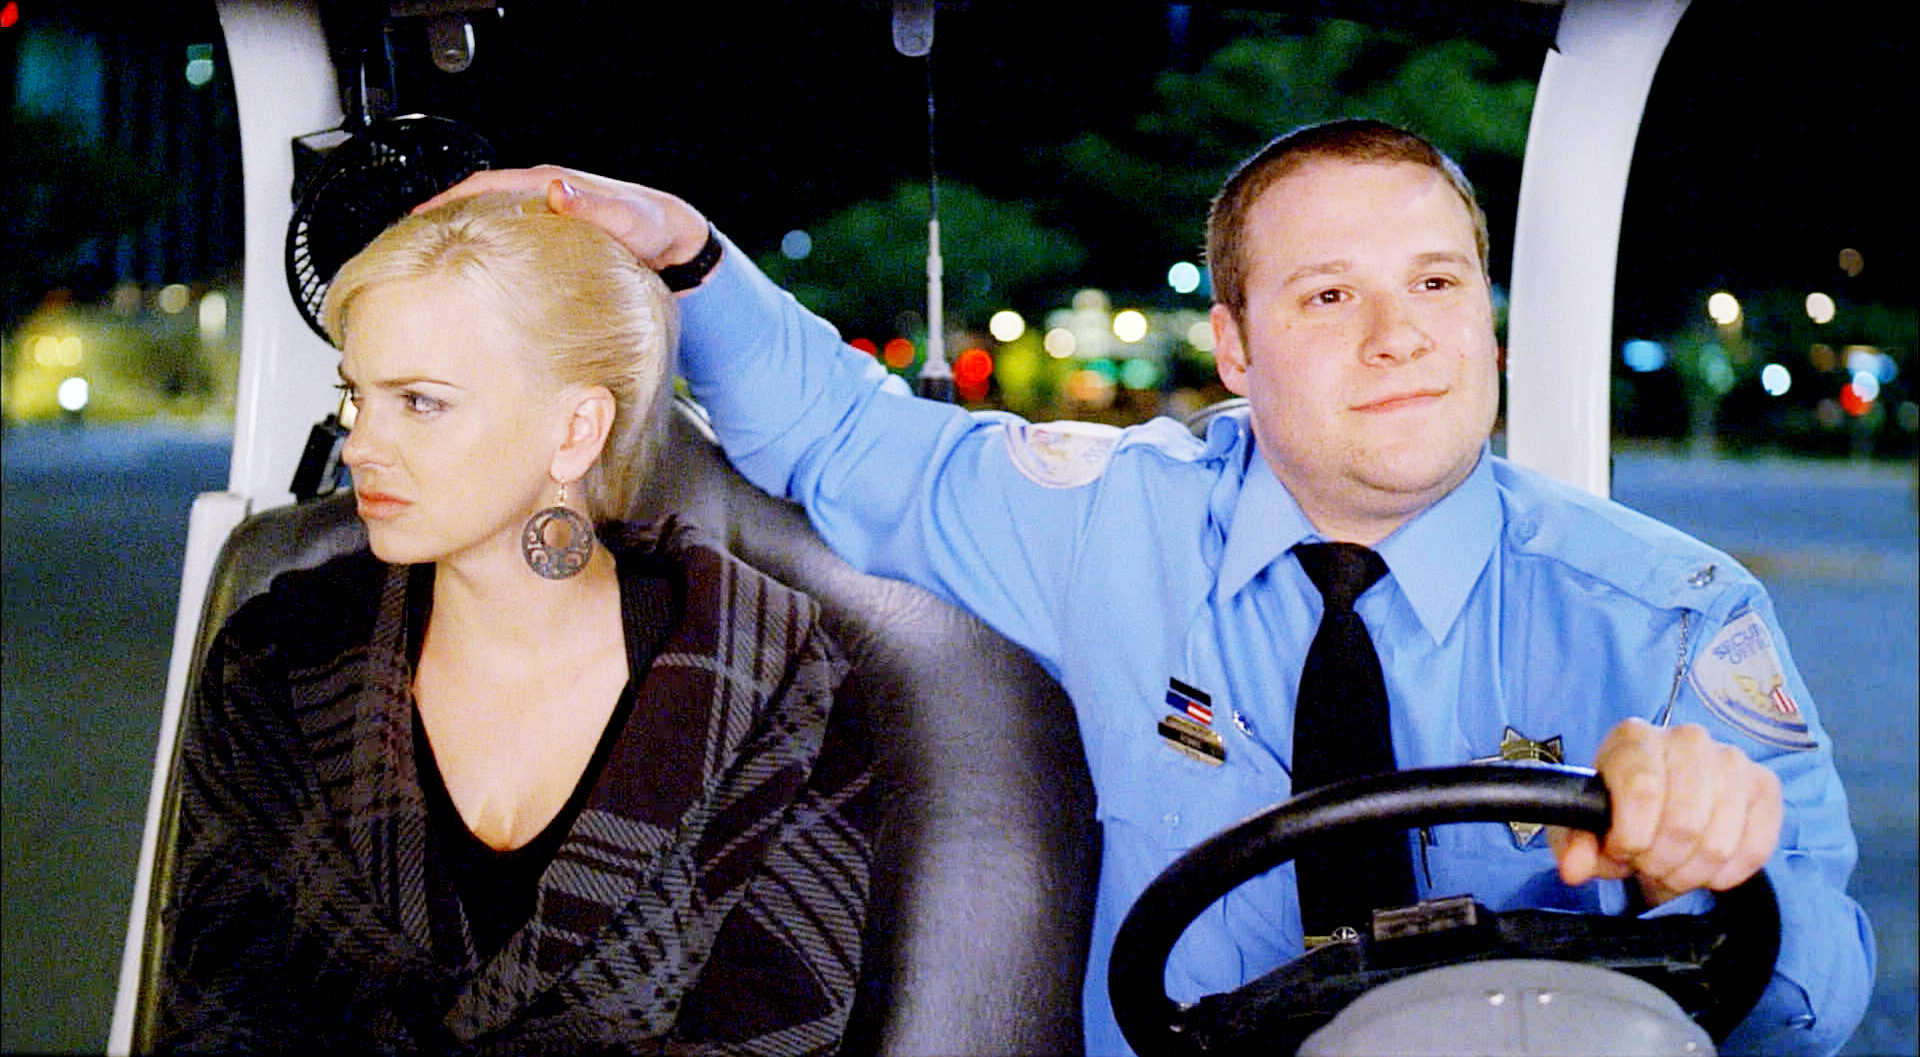 Anna Faris stars as Brandi and Seth Rogen stars as Ronnie Barnhardt in Warner Bros. Pictures' Observe and Report (2009)